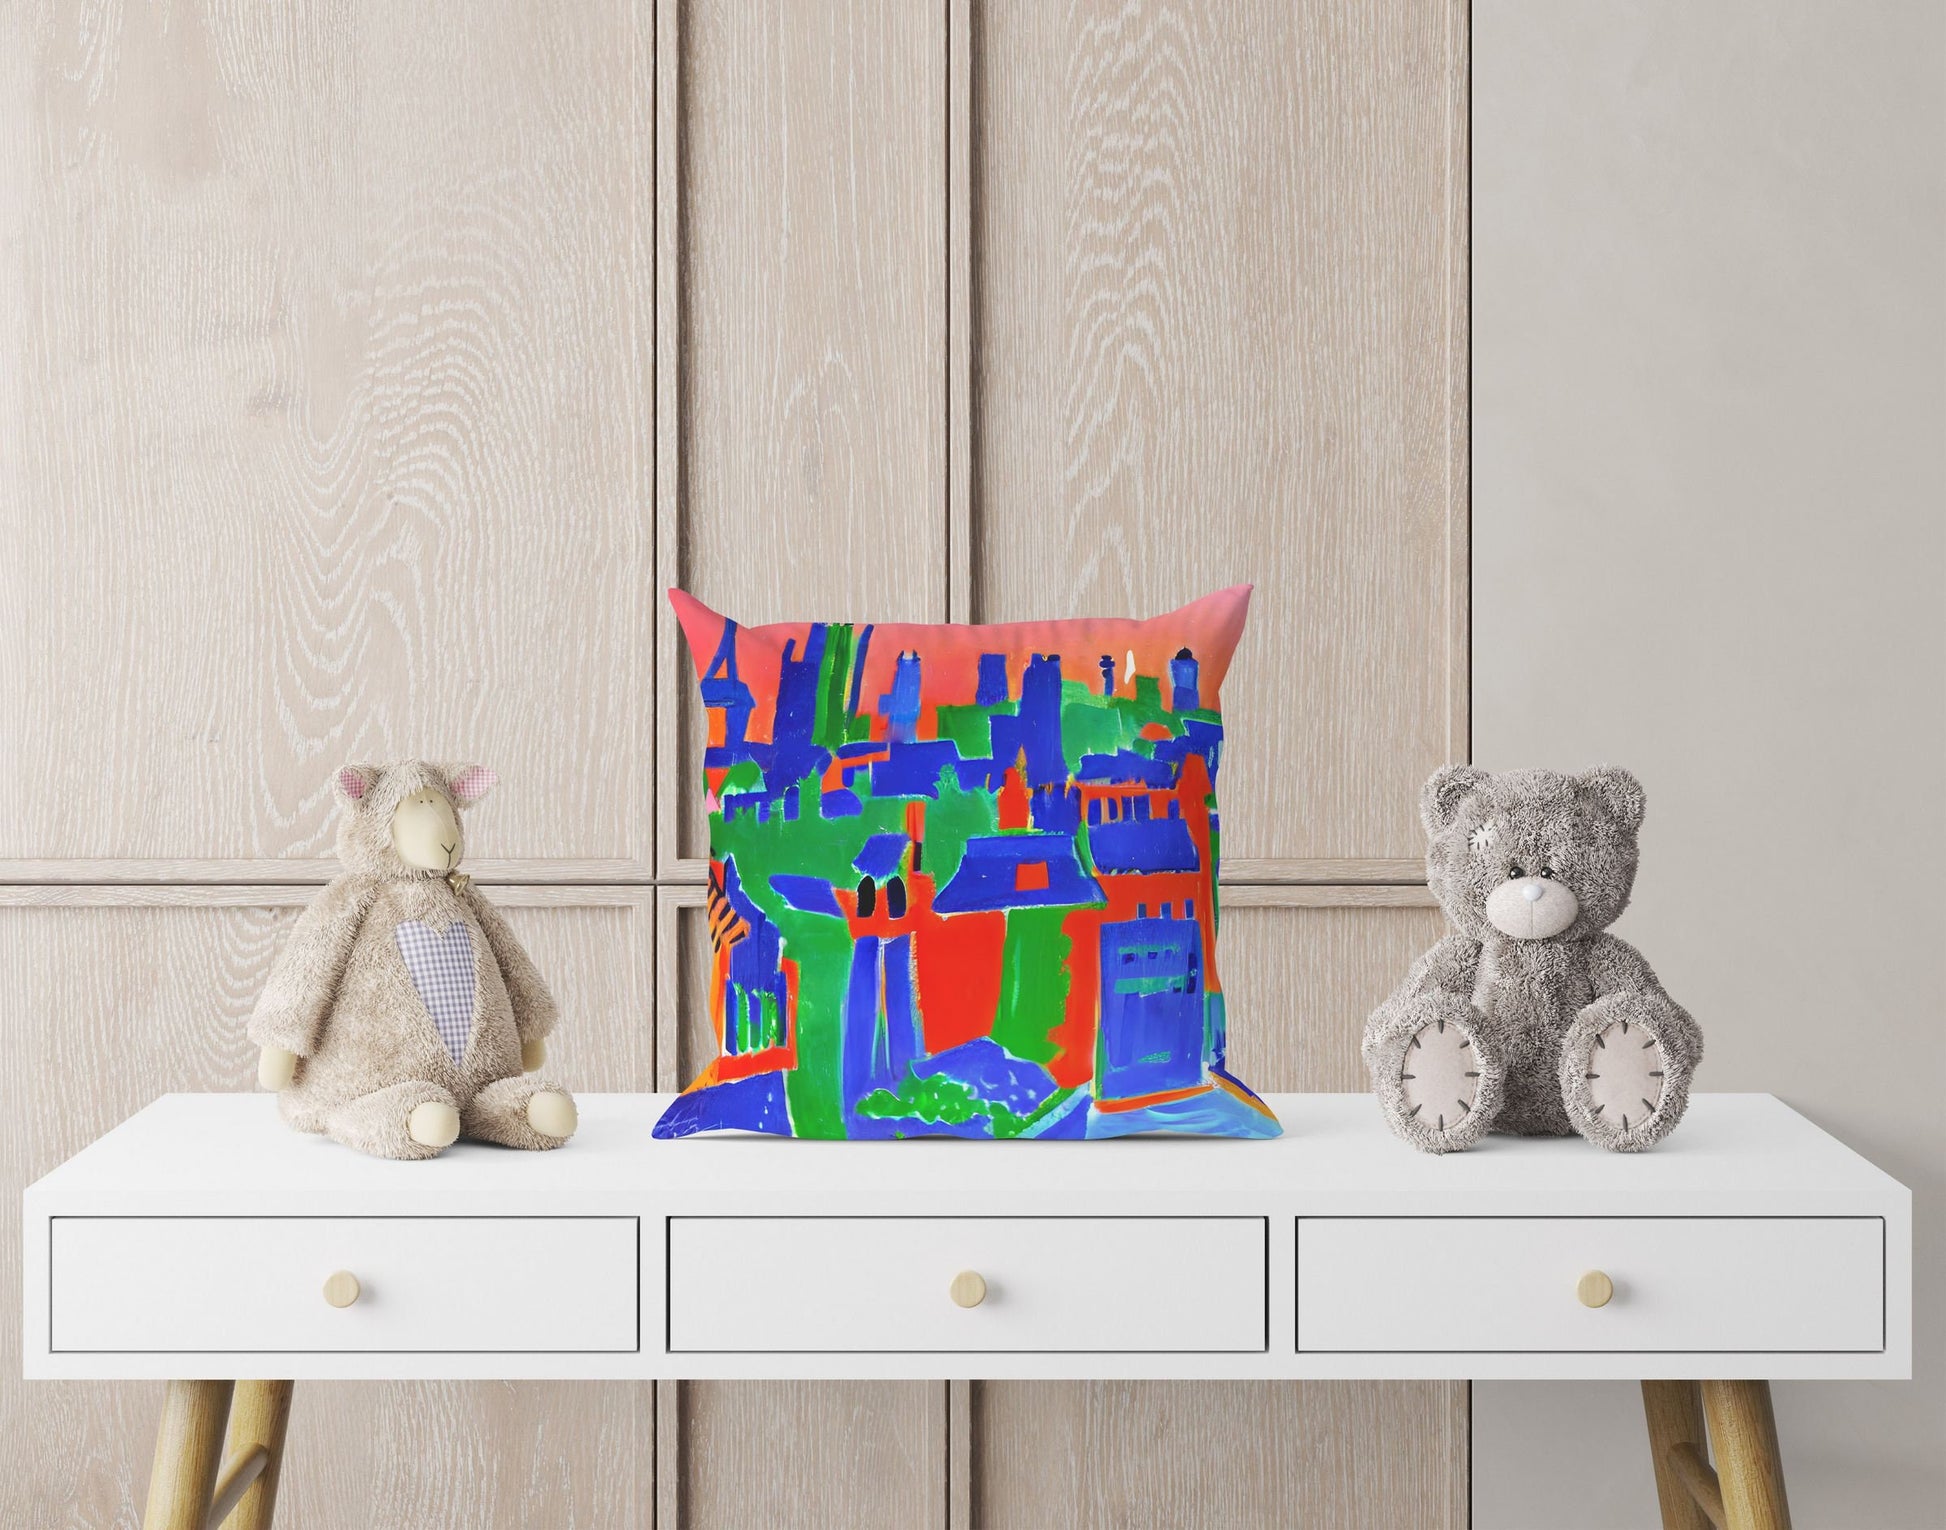 Paris City View, Tapestry Pillows, Abstract Pillow Case, Art Pillow, Colorful Pillow Case, Impressionist Pillow, 20X20 Pillow Cover